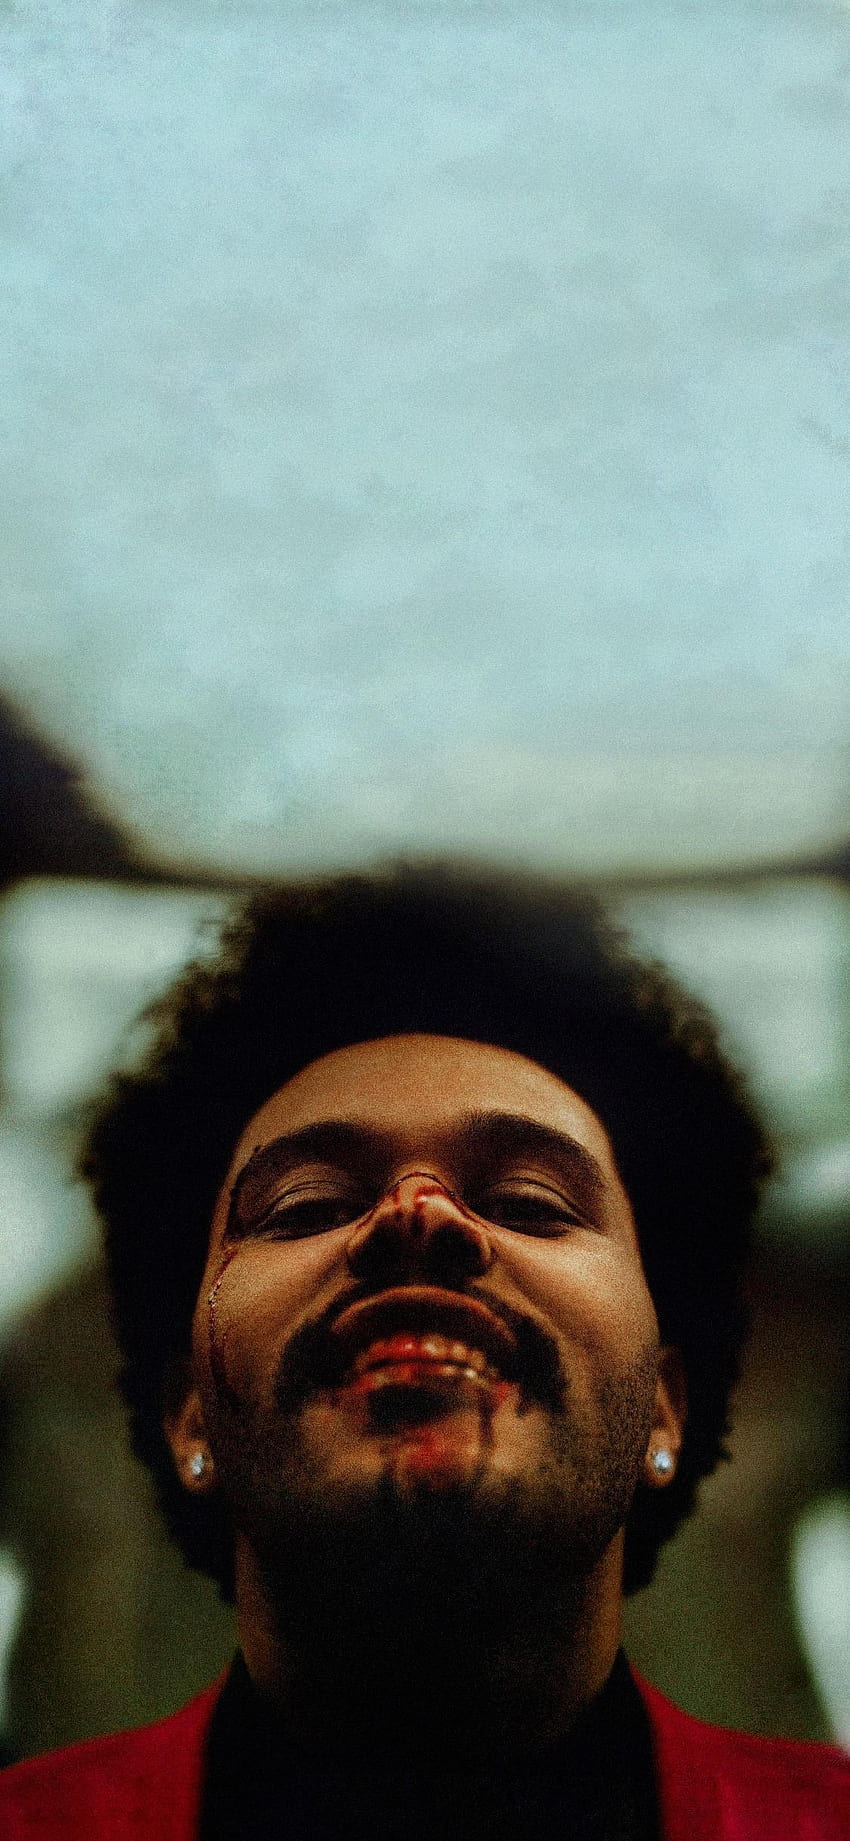 After Hours iPhone : TheWeeknd, the weeknd after hours HD phone wallpaper